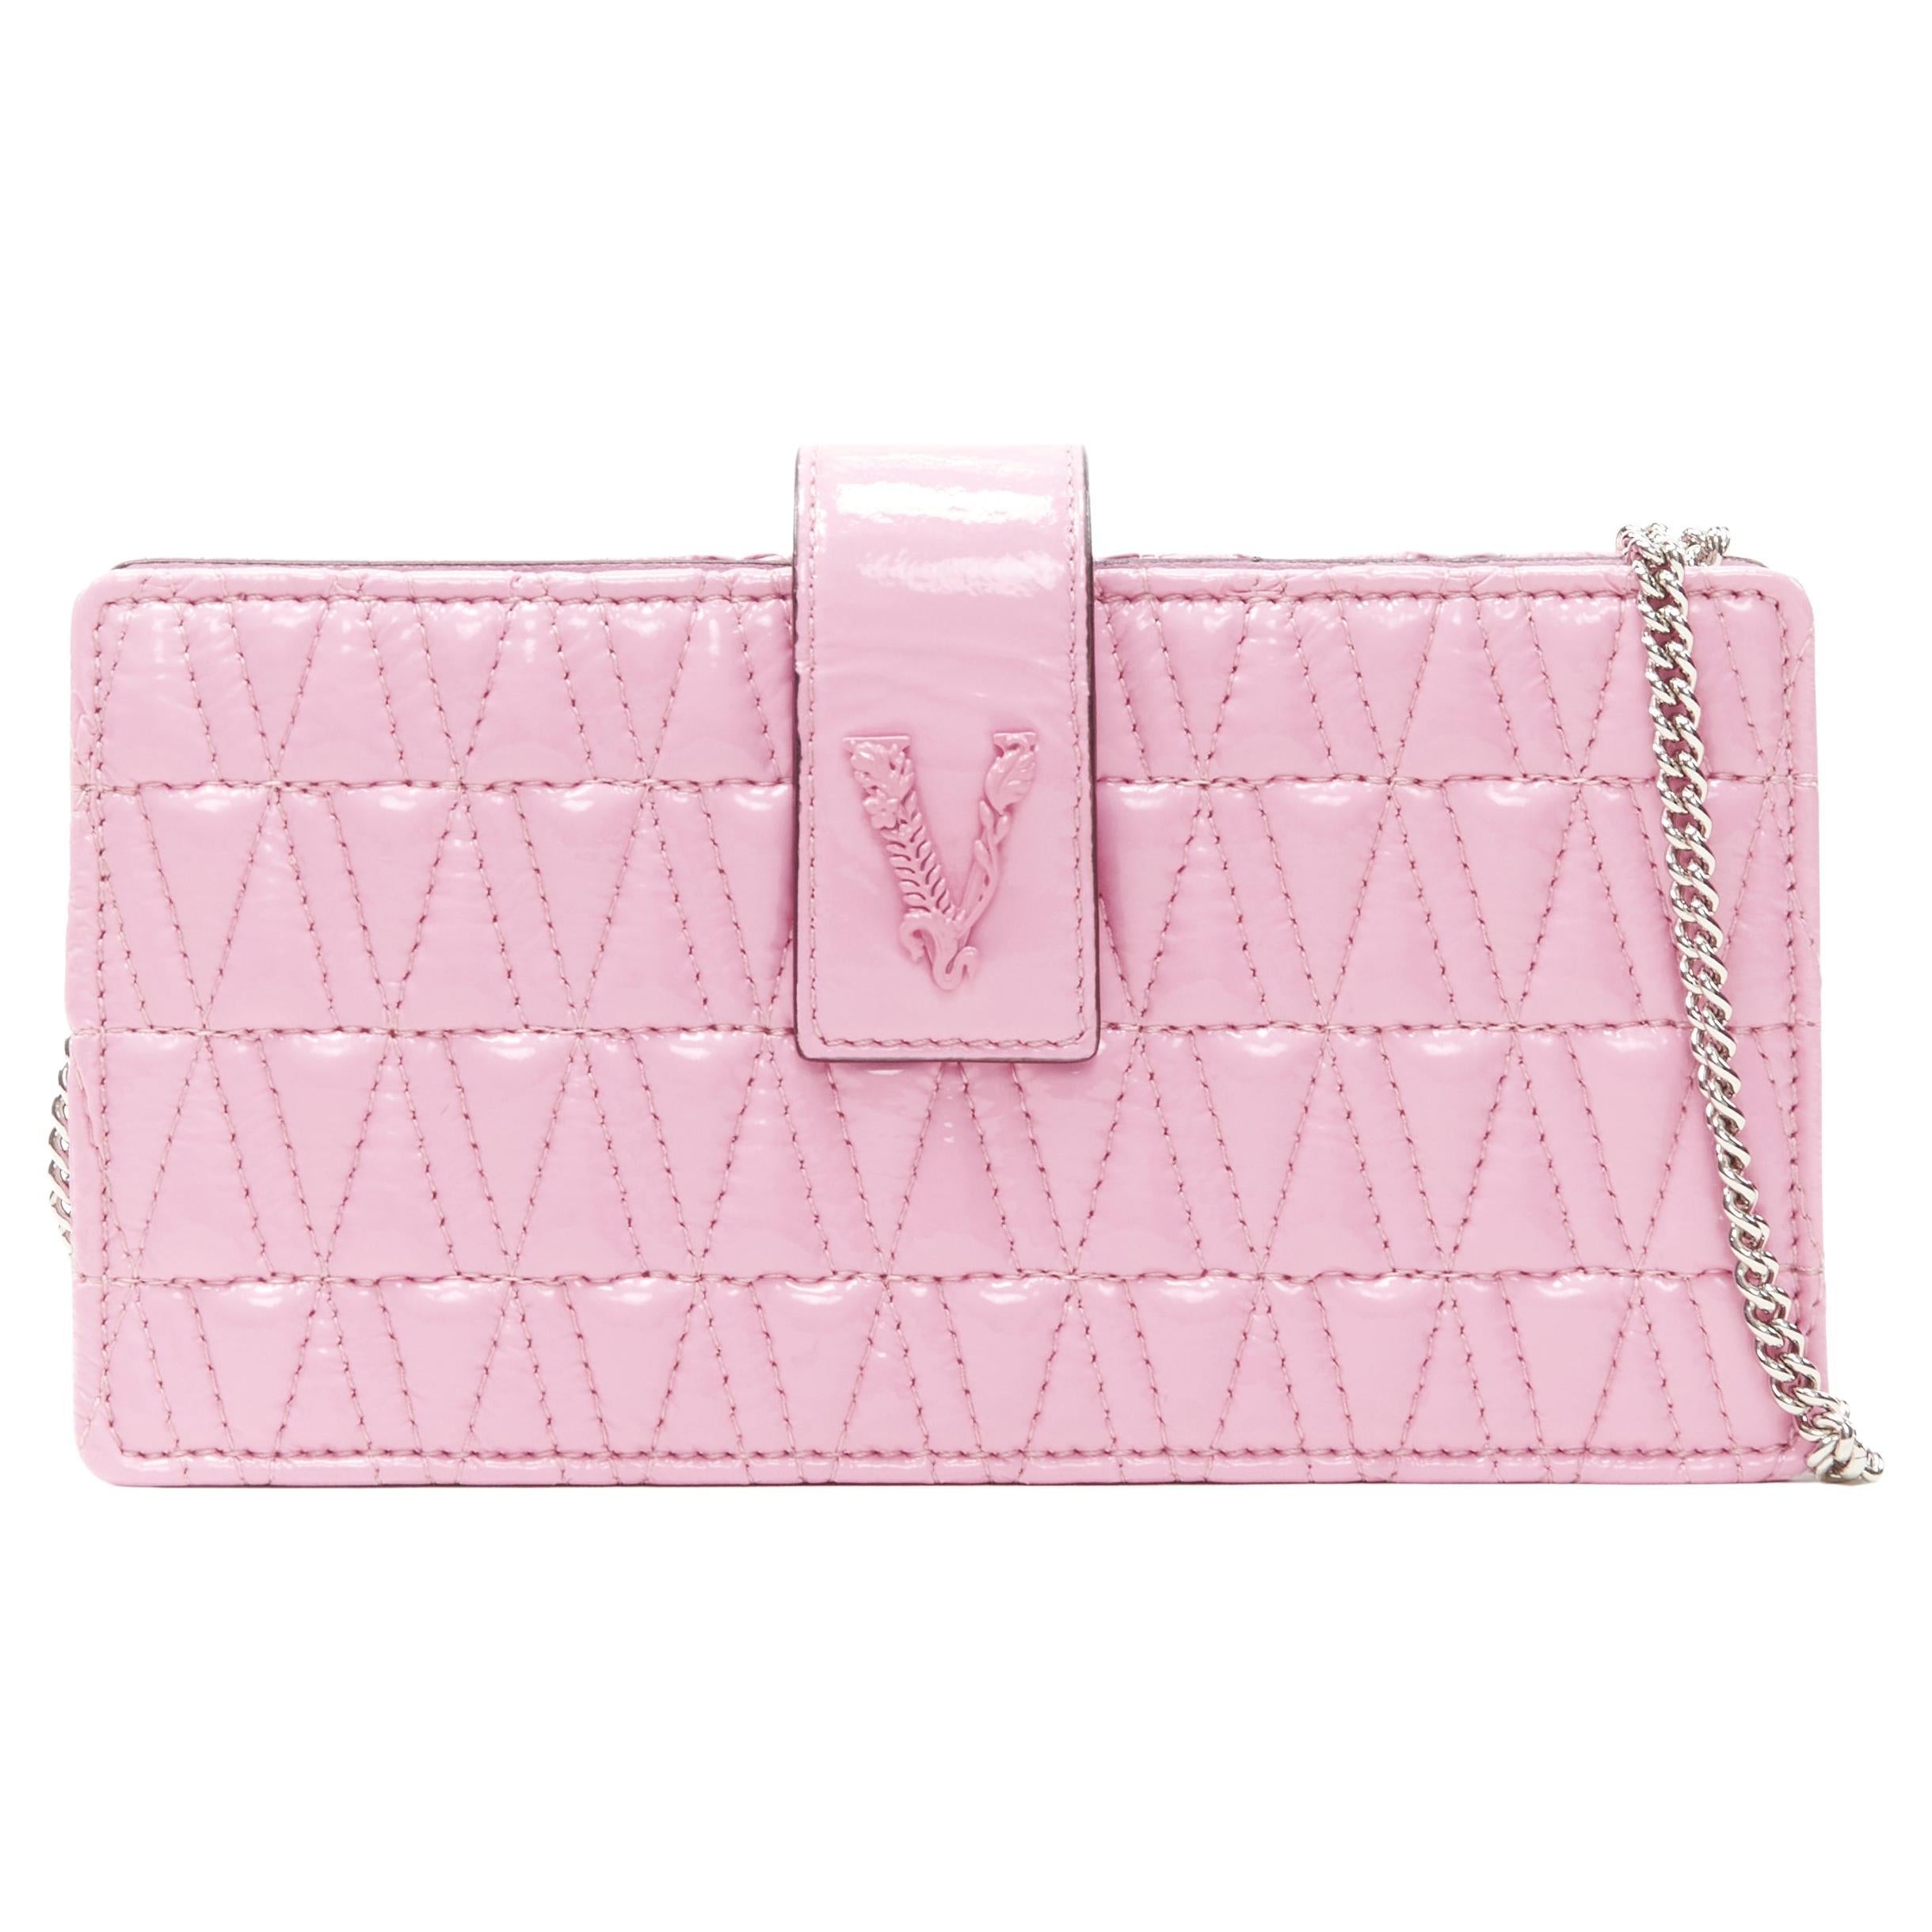 new VERSACE Virtus pink patent leather Barocco V quilted crossbody chain bag